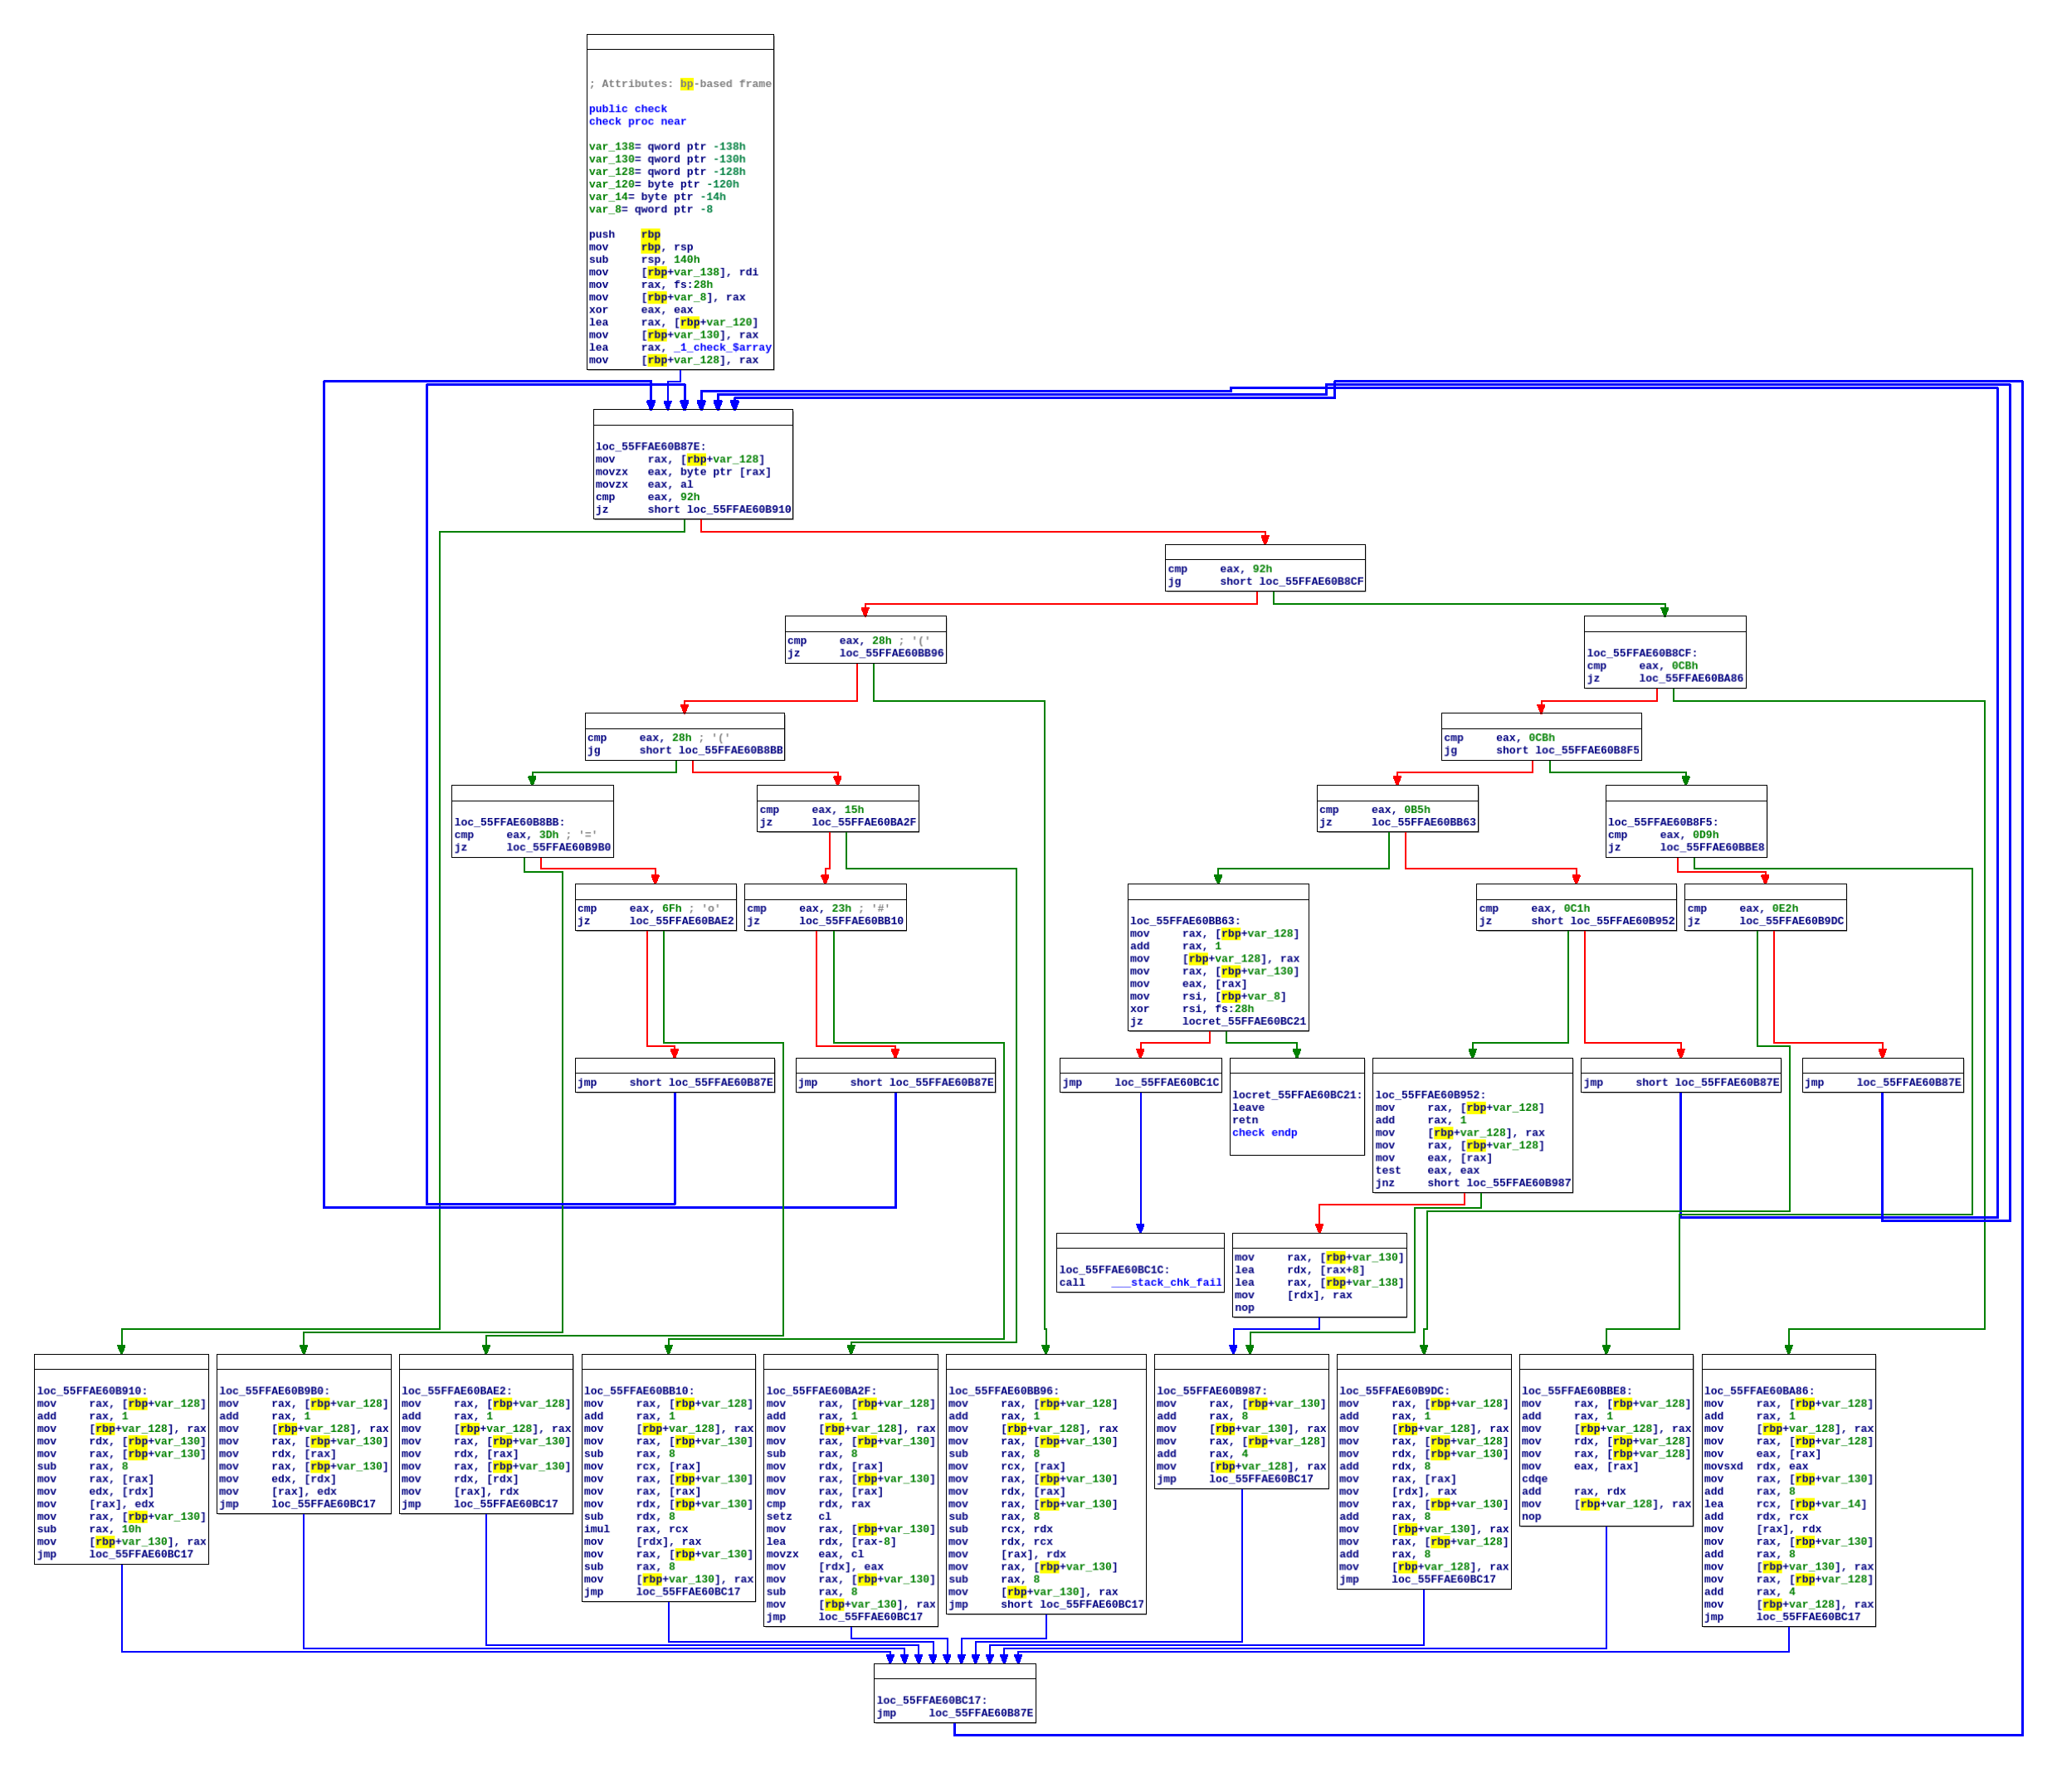 Control Flow Graph of check function after virtualization